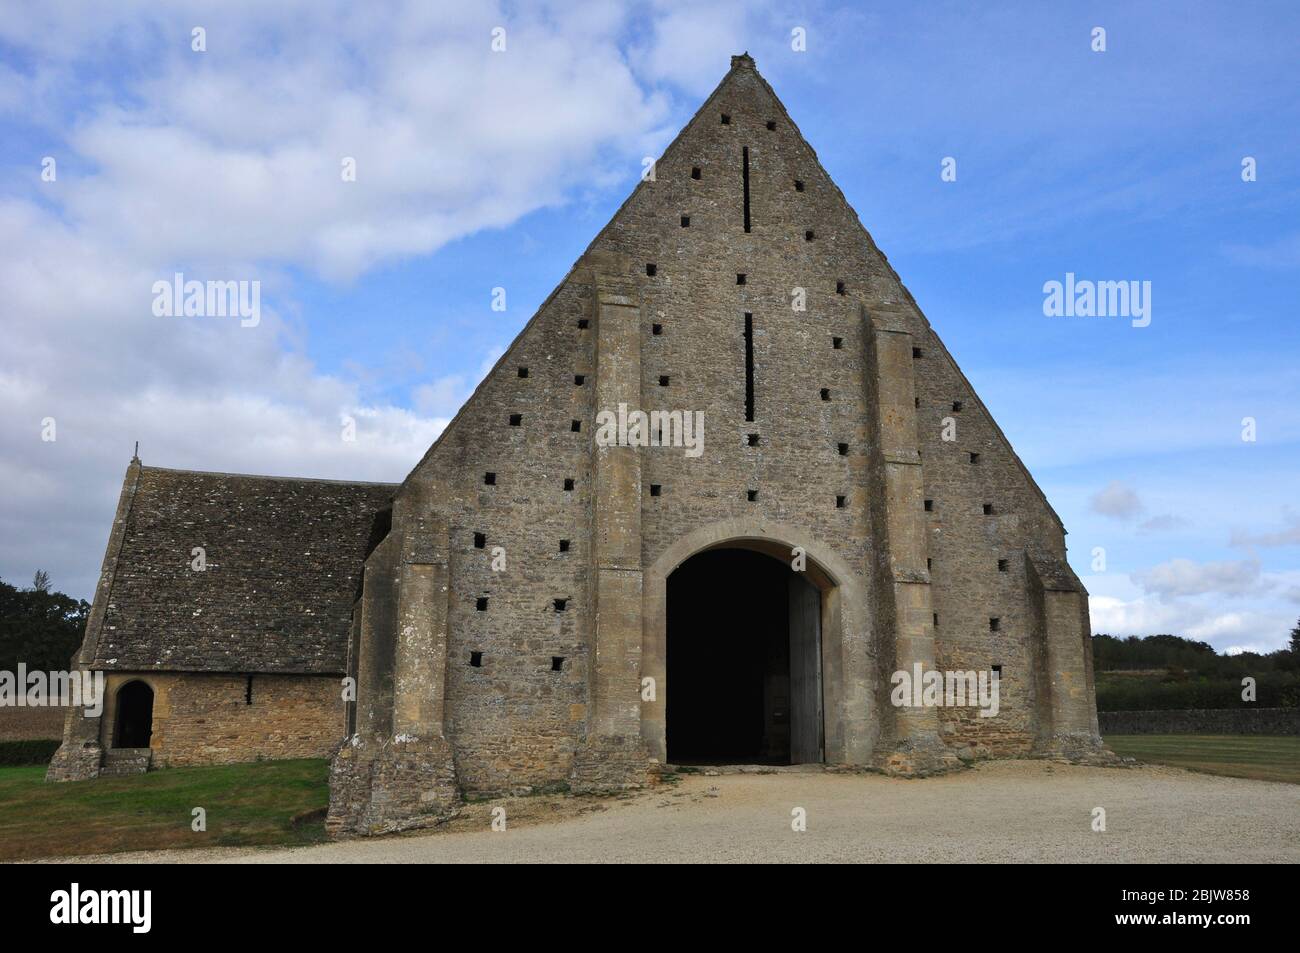 Great Coxwell tithe barn; built about 1292 for the Cistercian Beaulieu Abbey in Hampshire; which had held the manor of Great Coxwell since 1205.Built Stock Photo